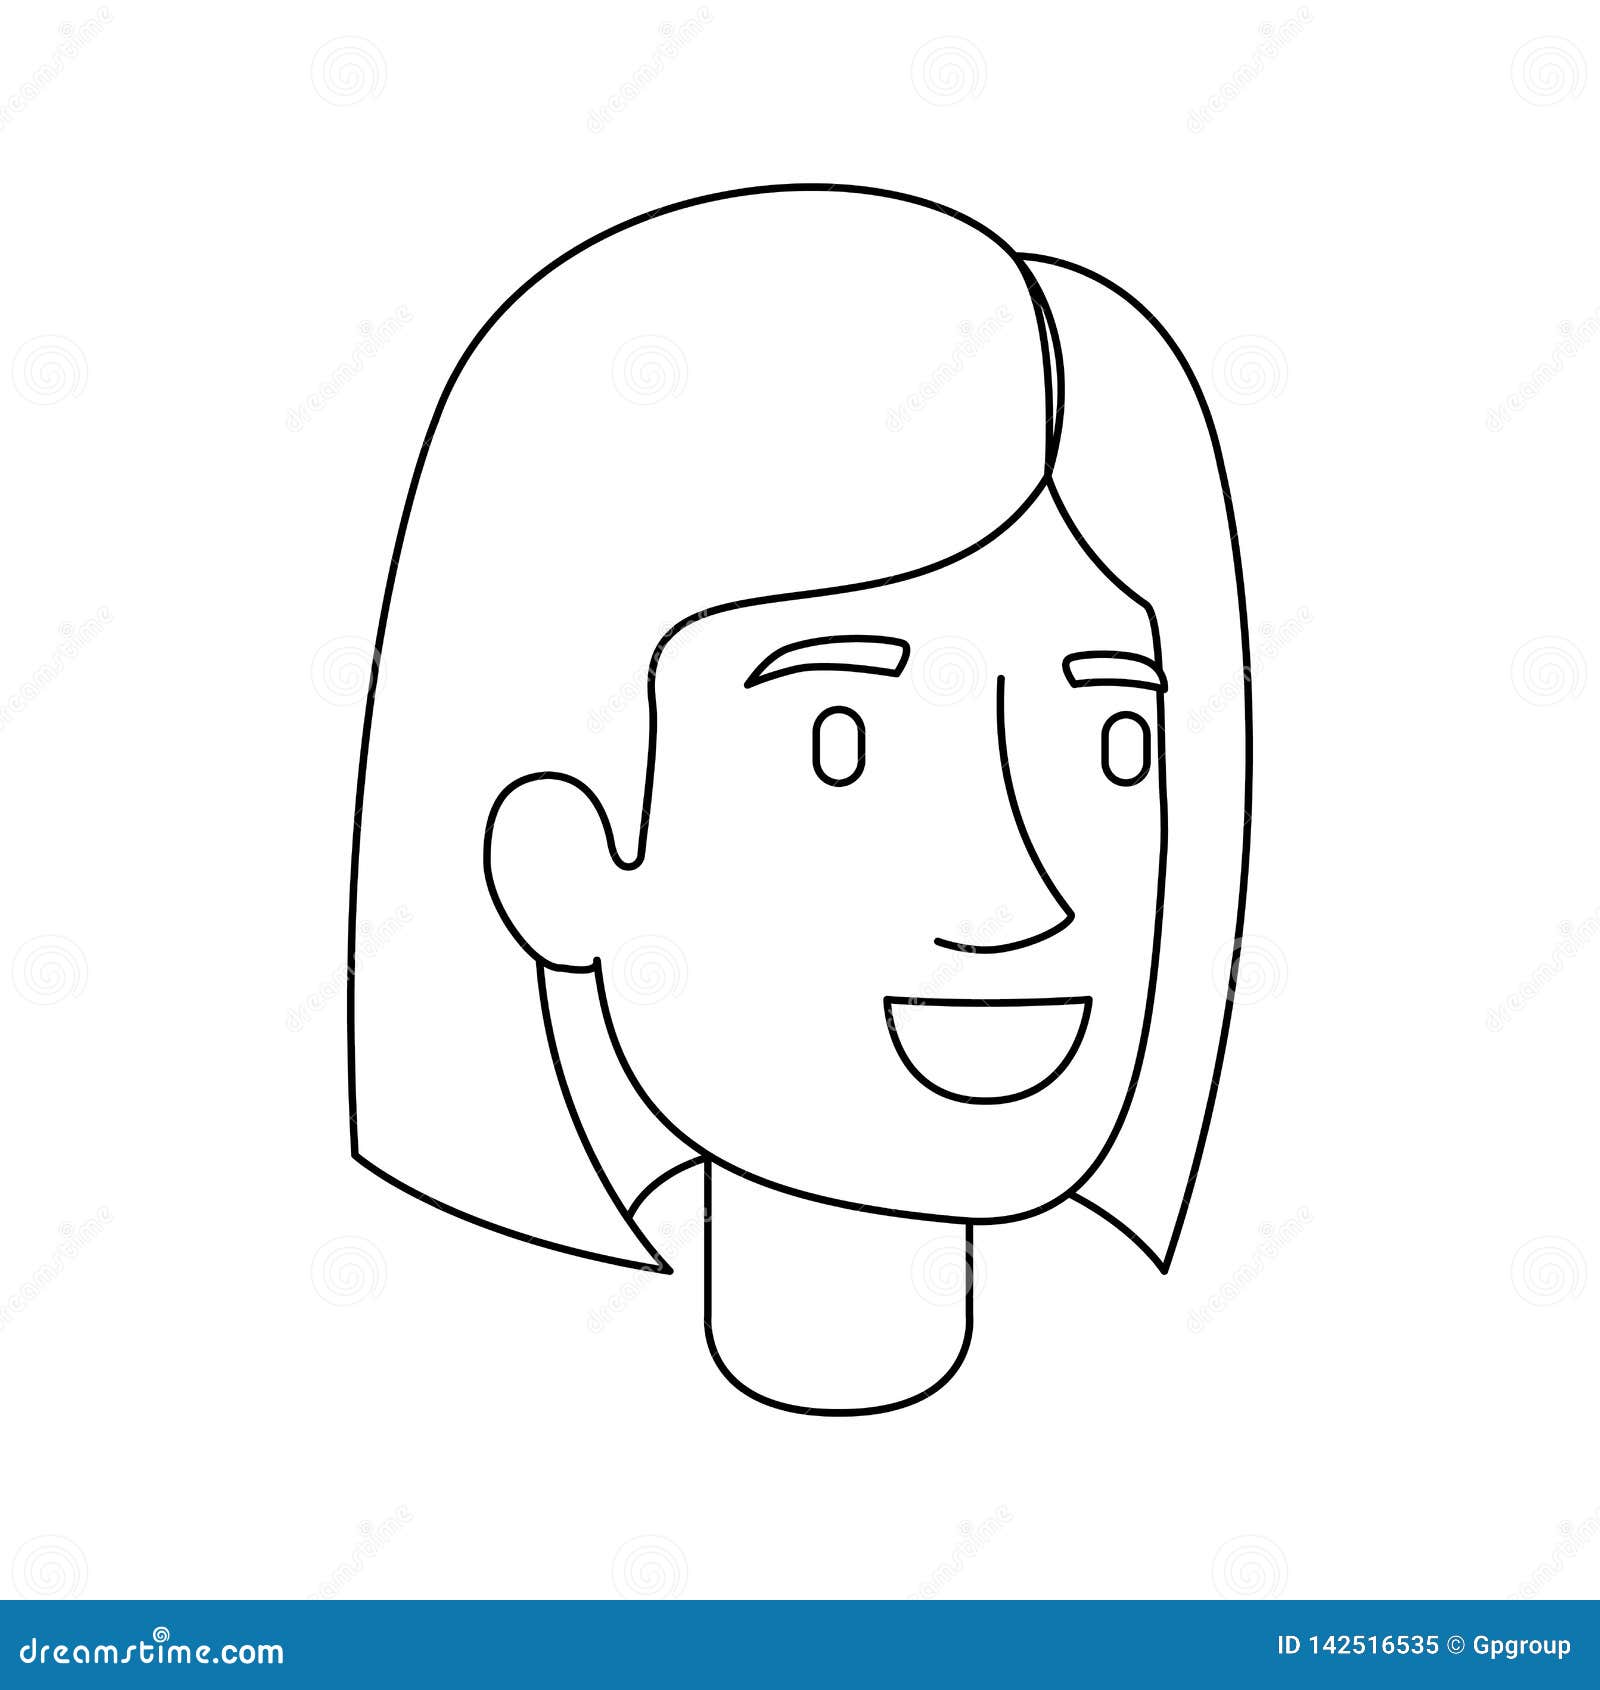 Monochrome Silhouette of Woman Face with Mushroom Cut Stock Vector ...